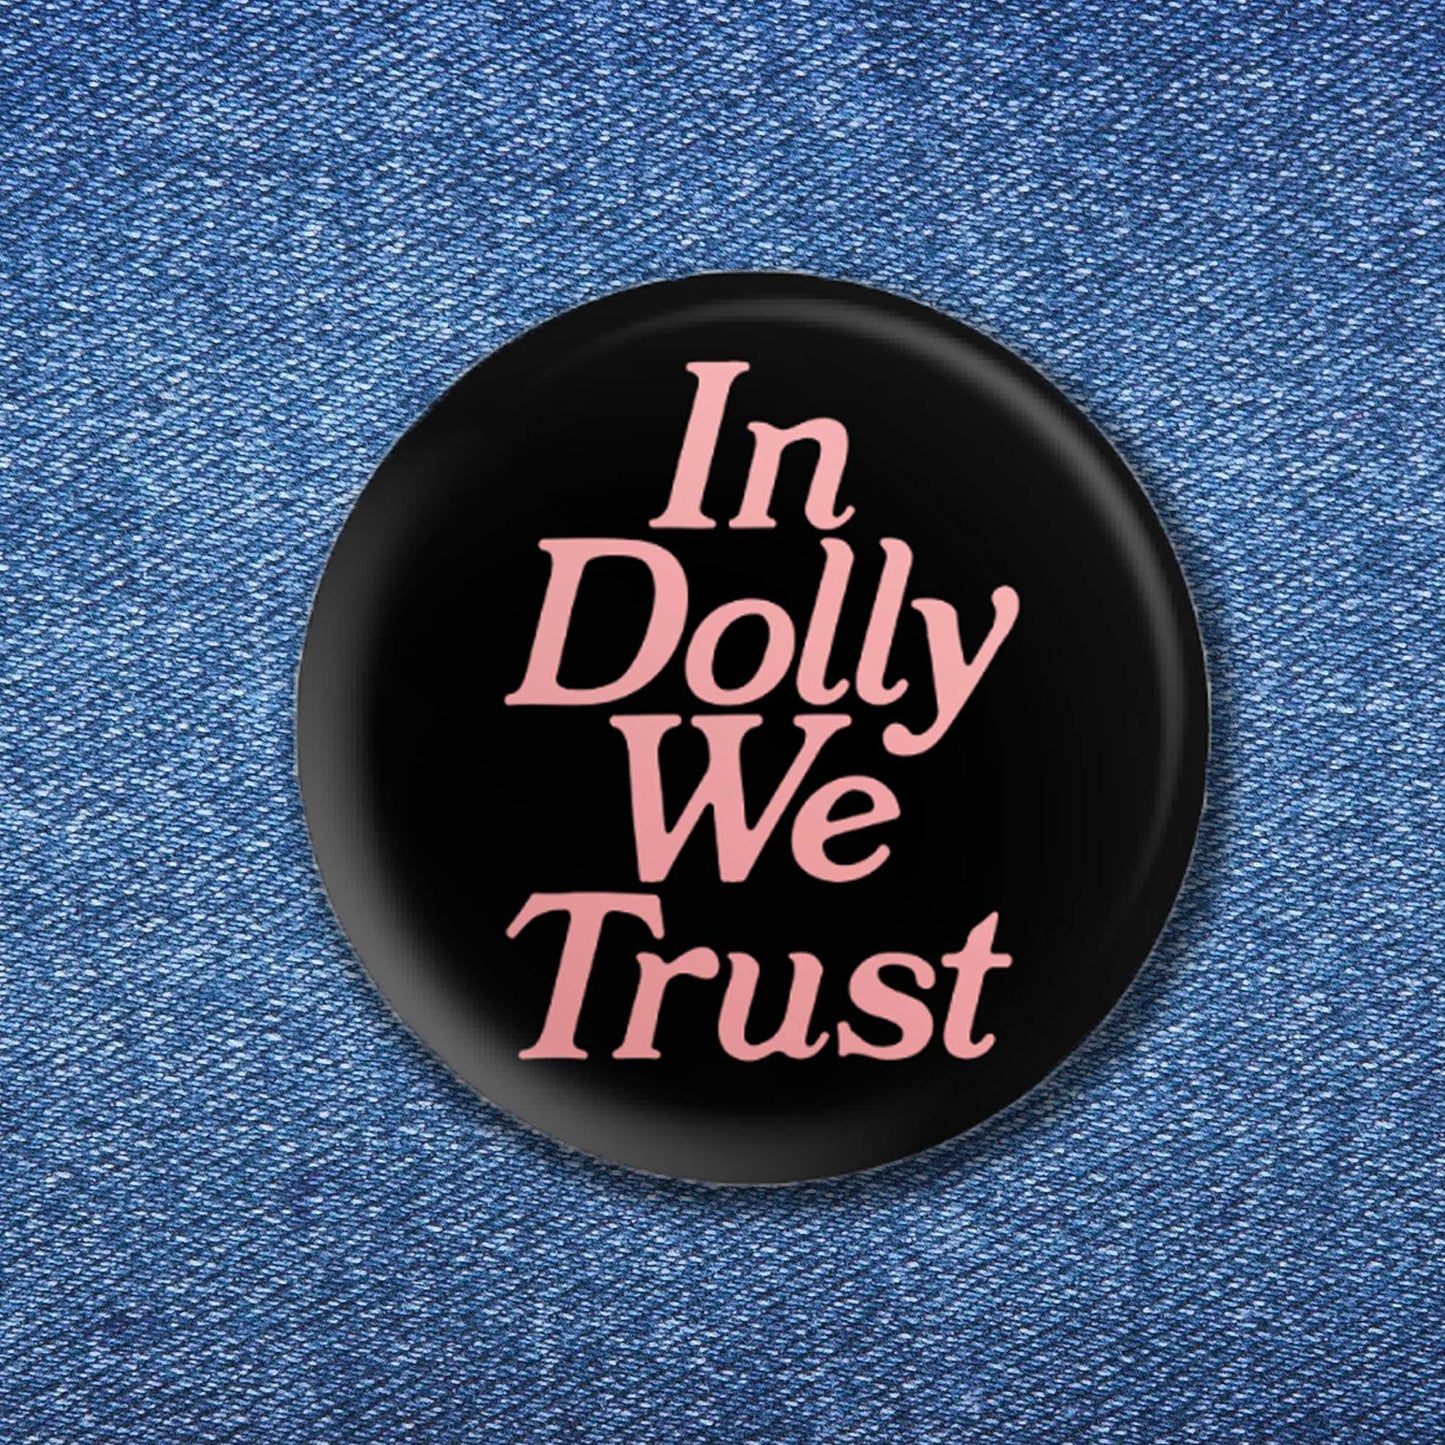 BOBBYK boutique - In Dolly We Trust Button